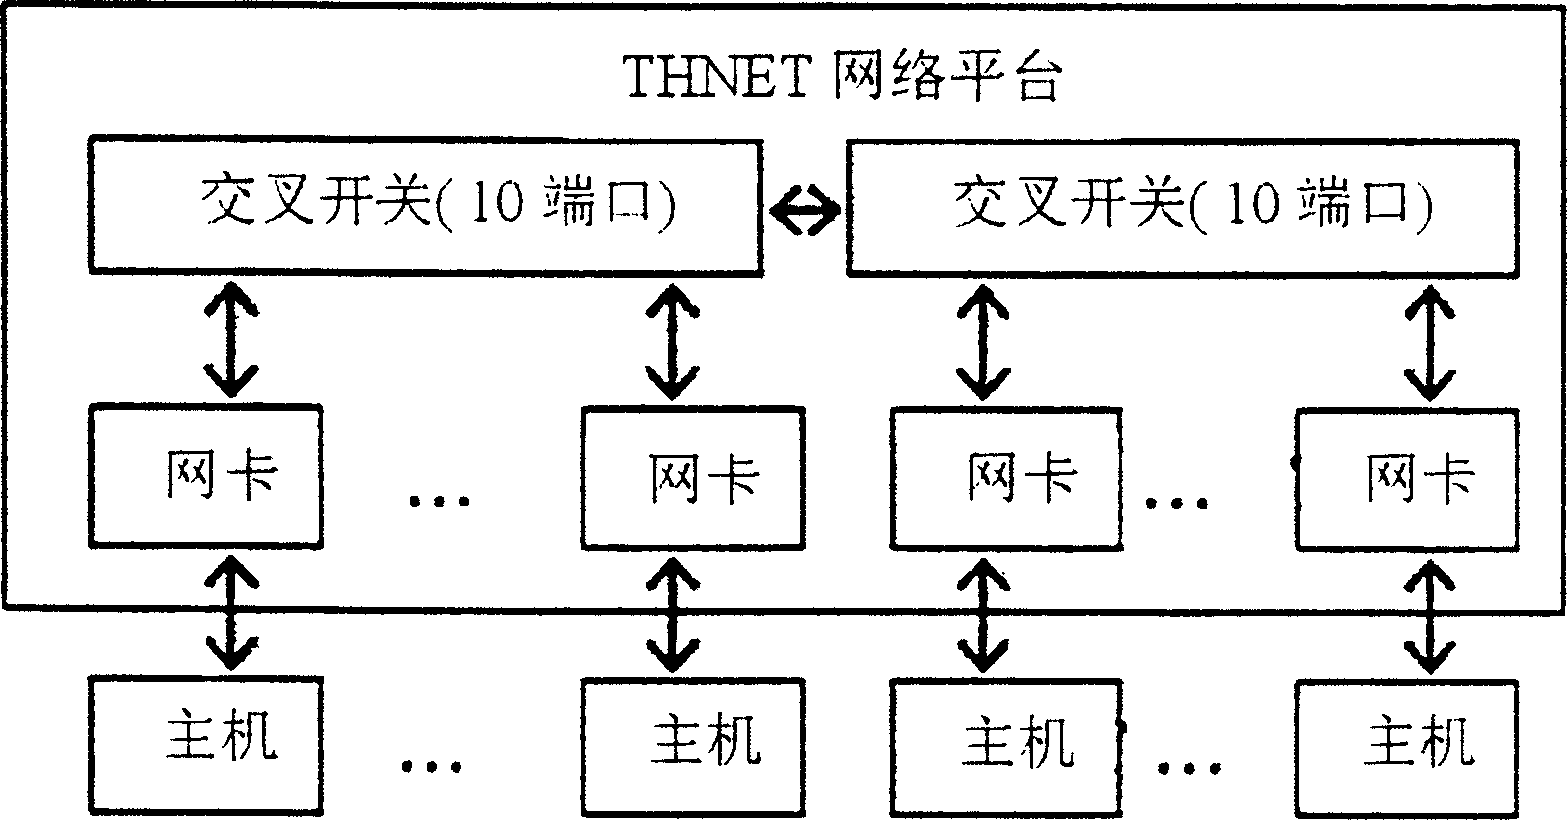 Virtual interface structure user layer network communication system based on hardware support